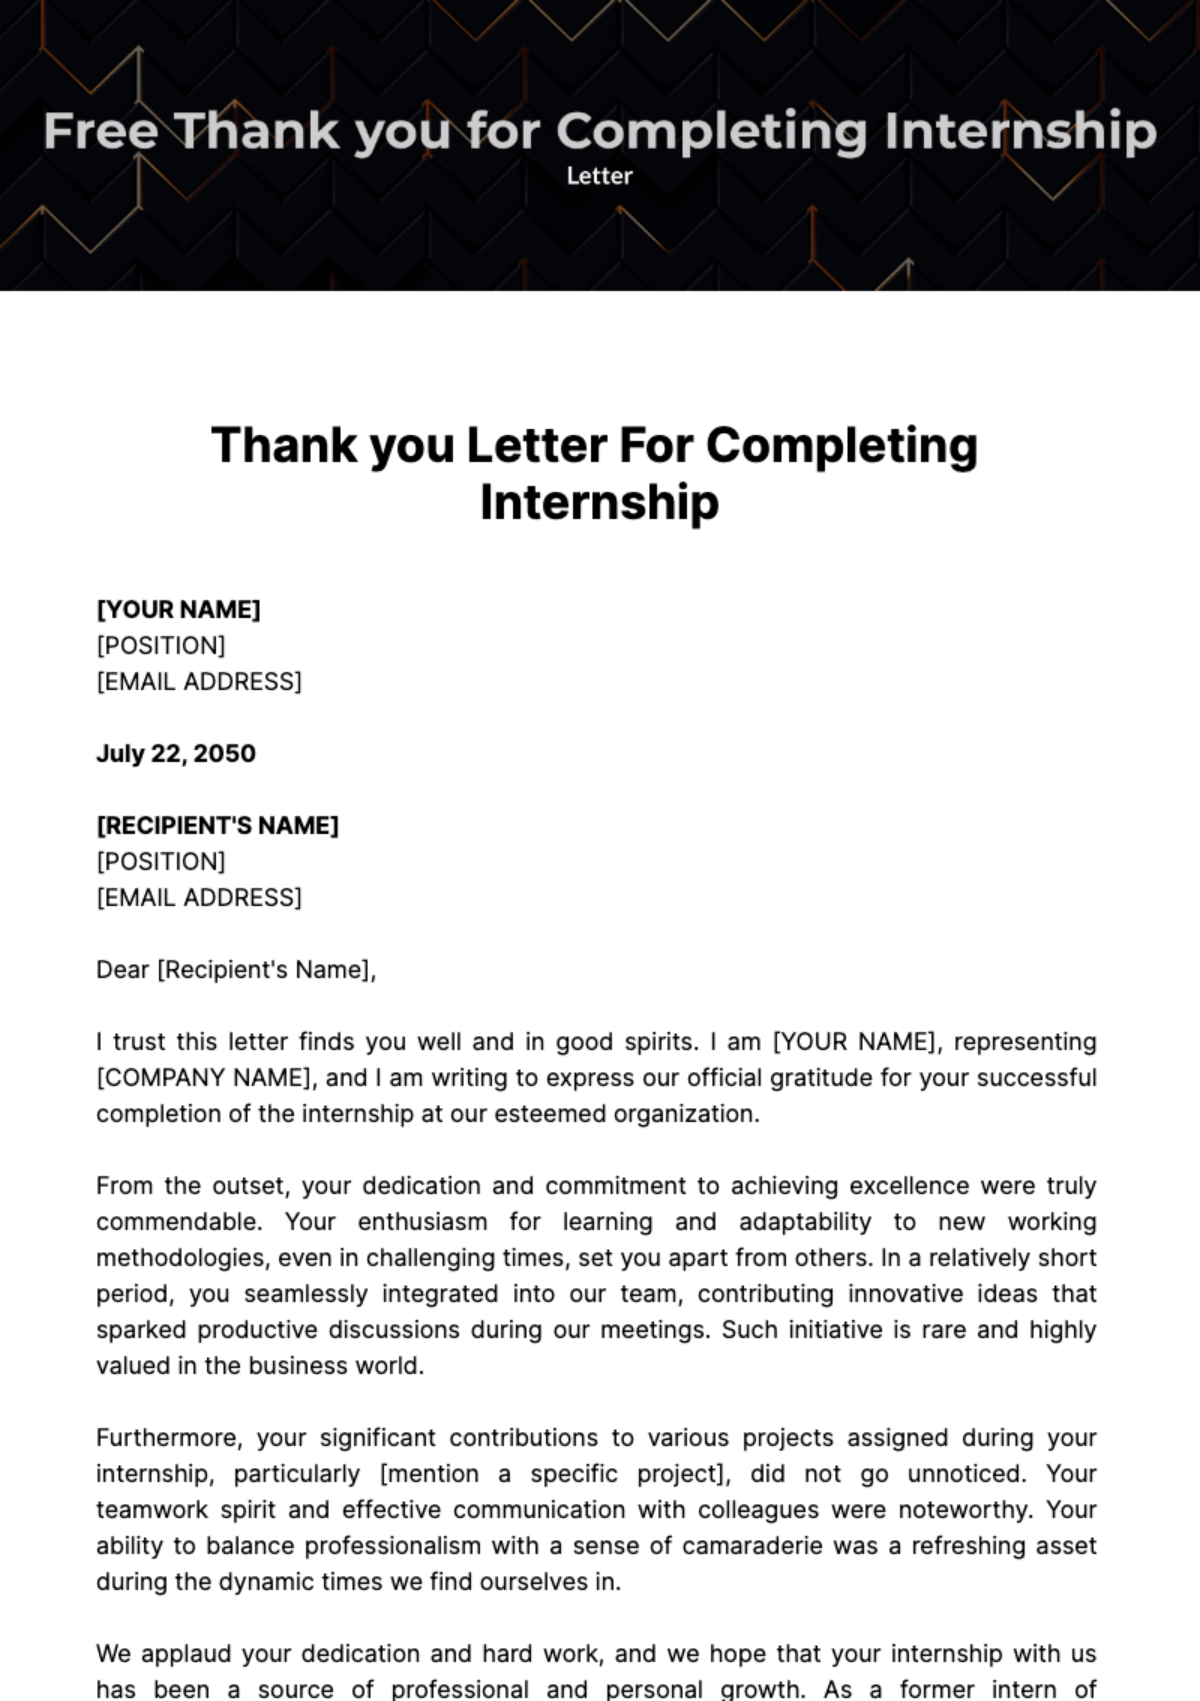 Thank you Letter for Completing Internship Template